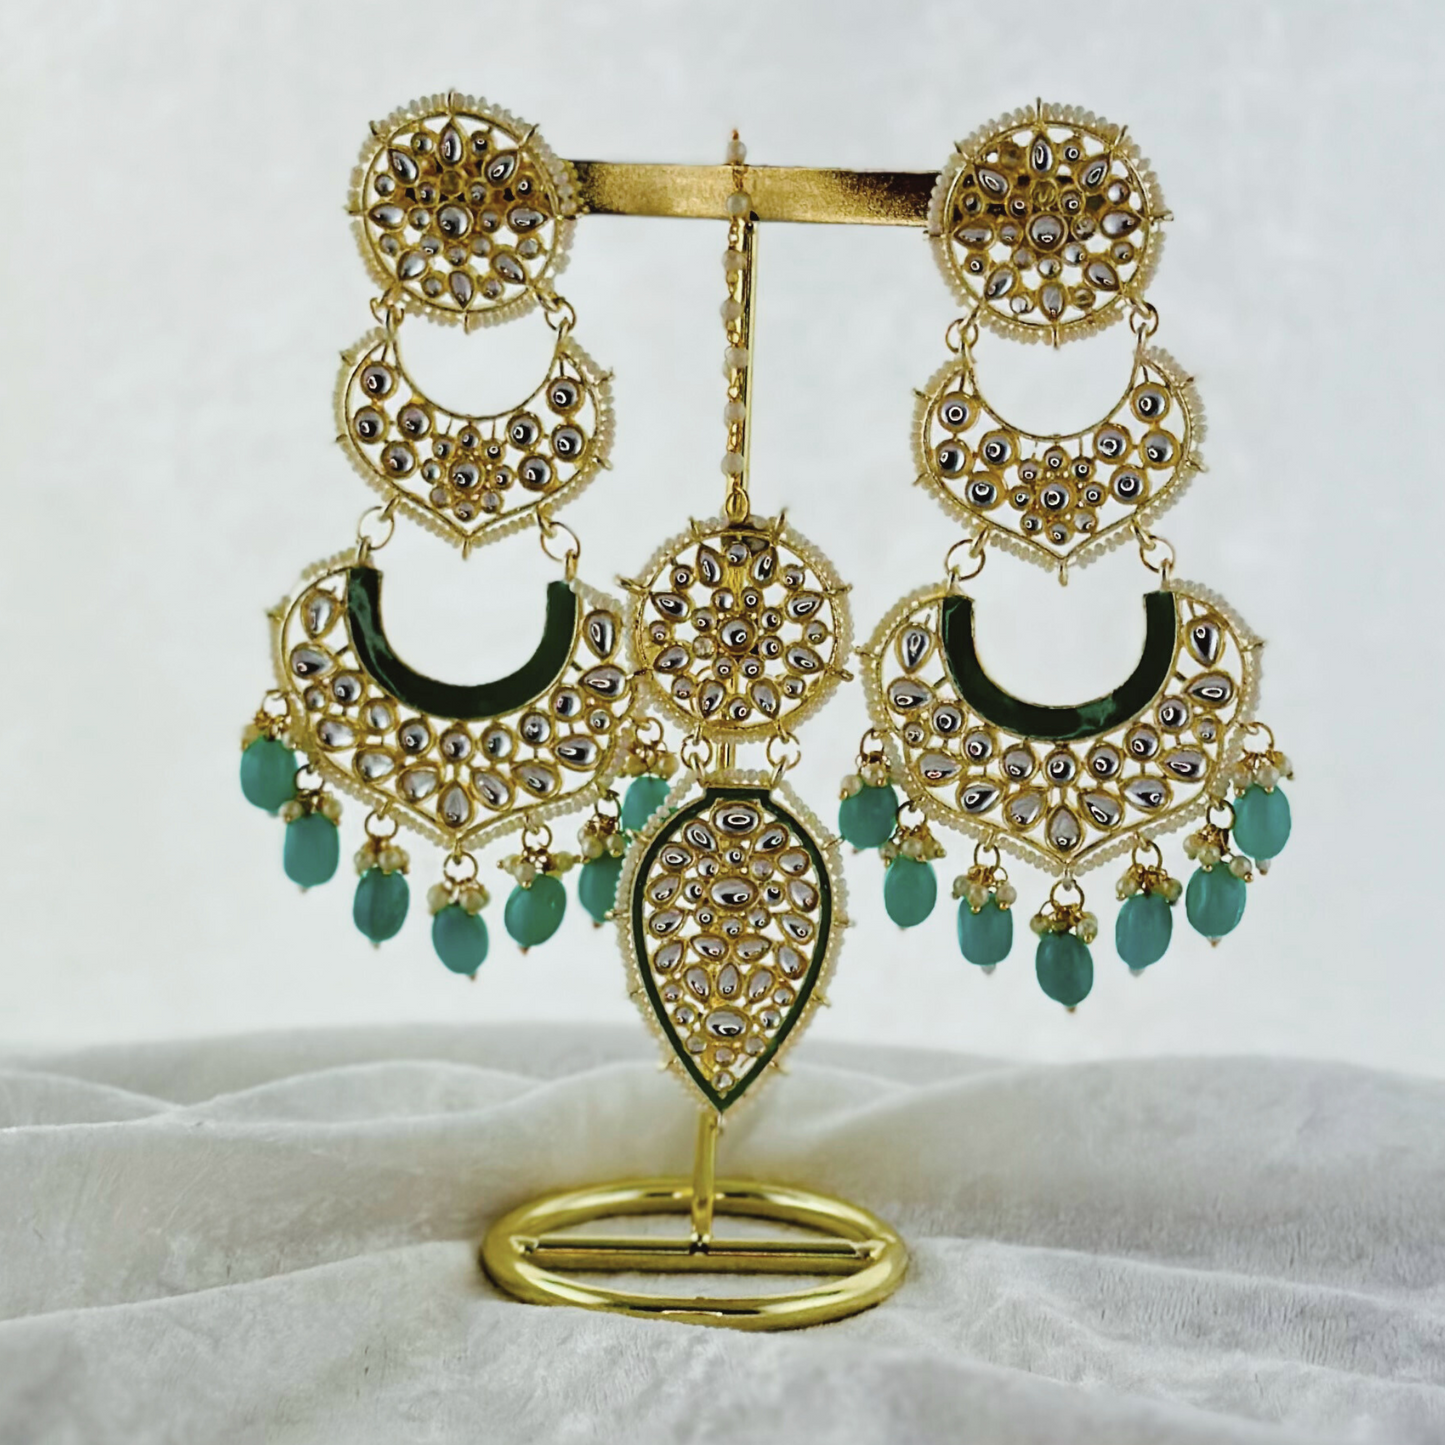 Tikka & Earring Set in turquoise.   High quality beads, pearls and stone work.   Latest 2023 fashion for weddings, parties and special occasions 